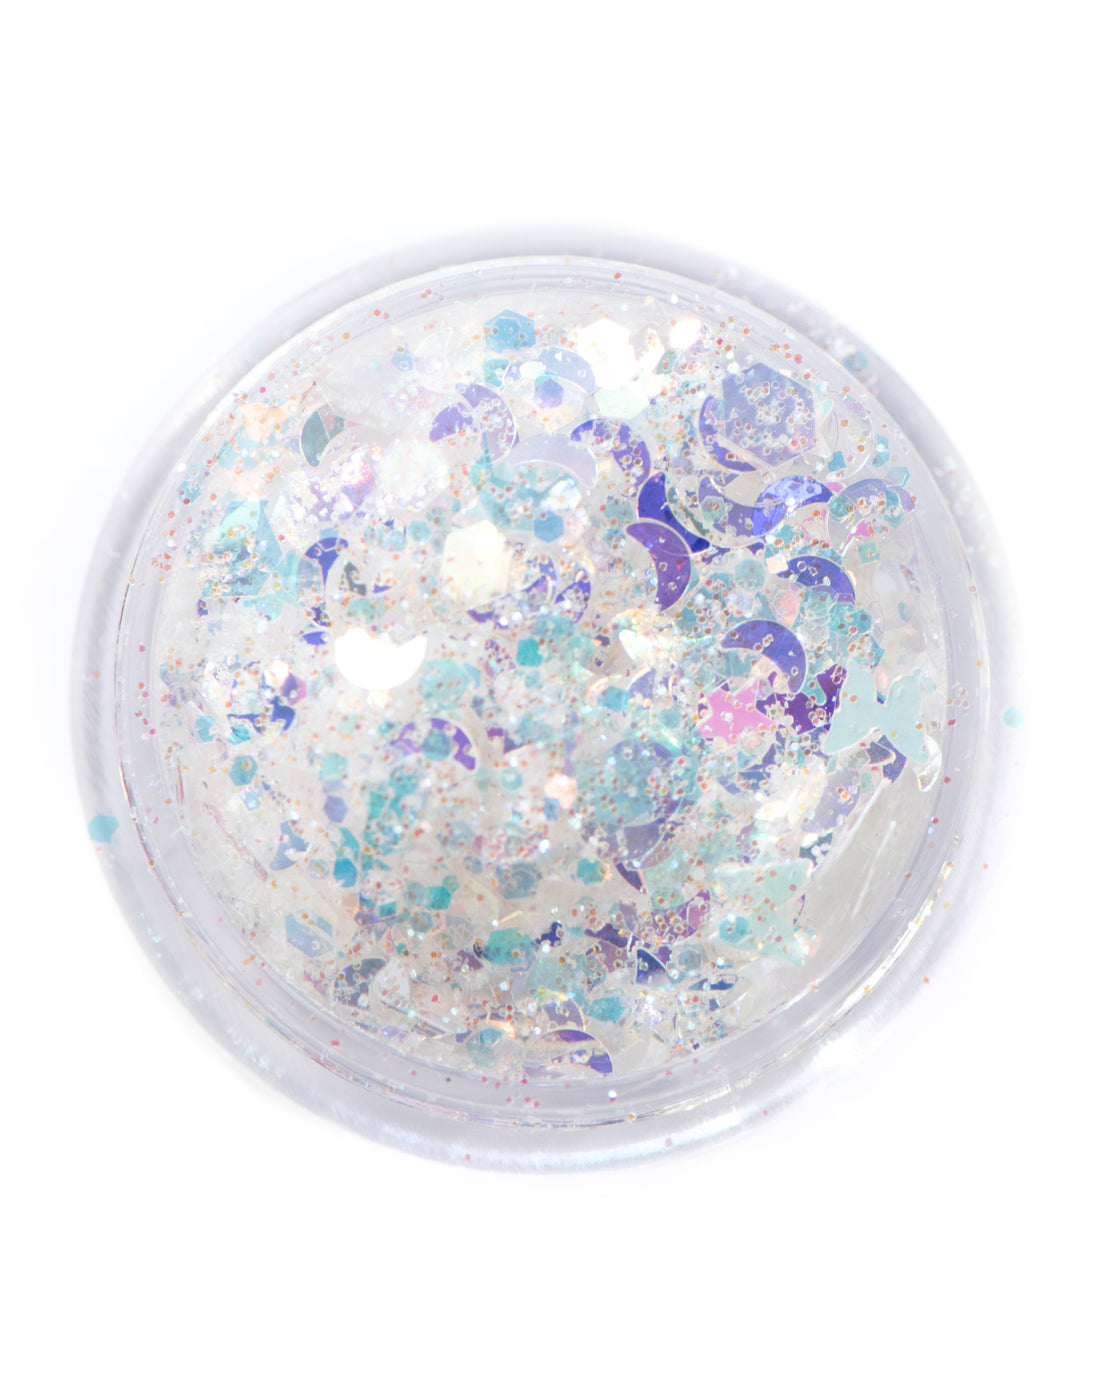 Moon Beams - Iridescent Chunky Glitter Mix with Moons and Stars - Lunautics Chunky Glitter